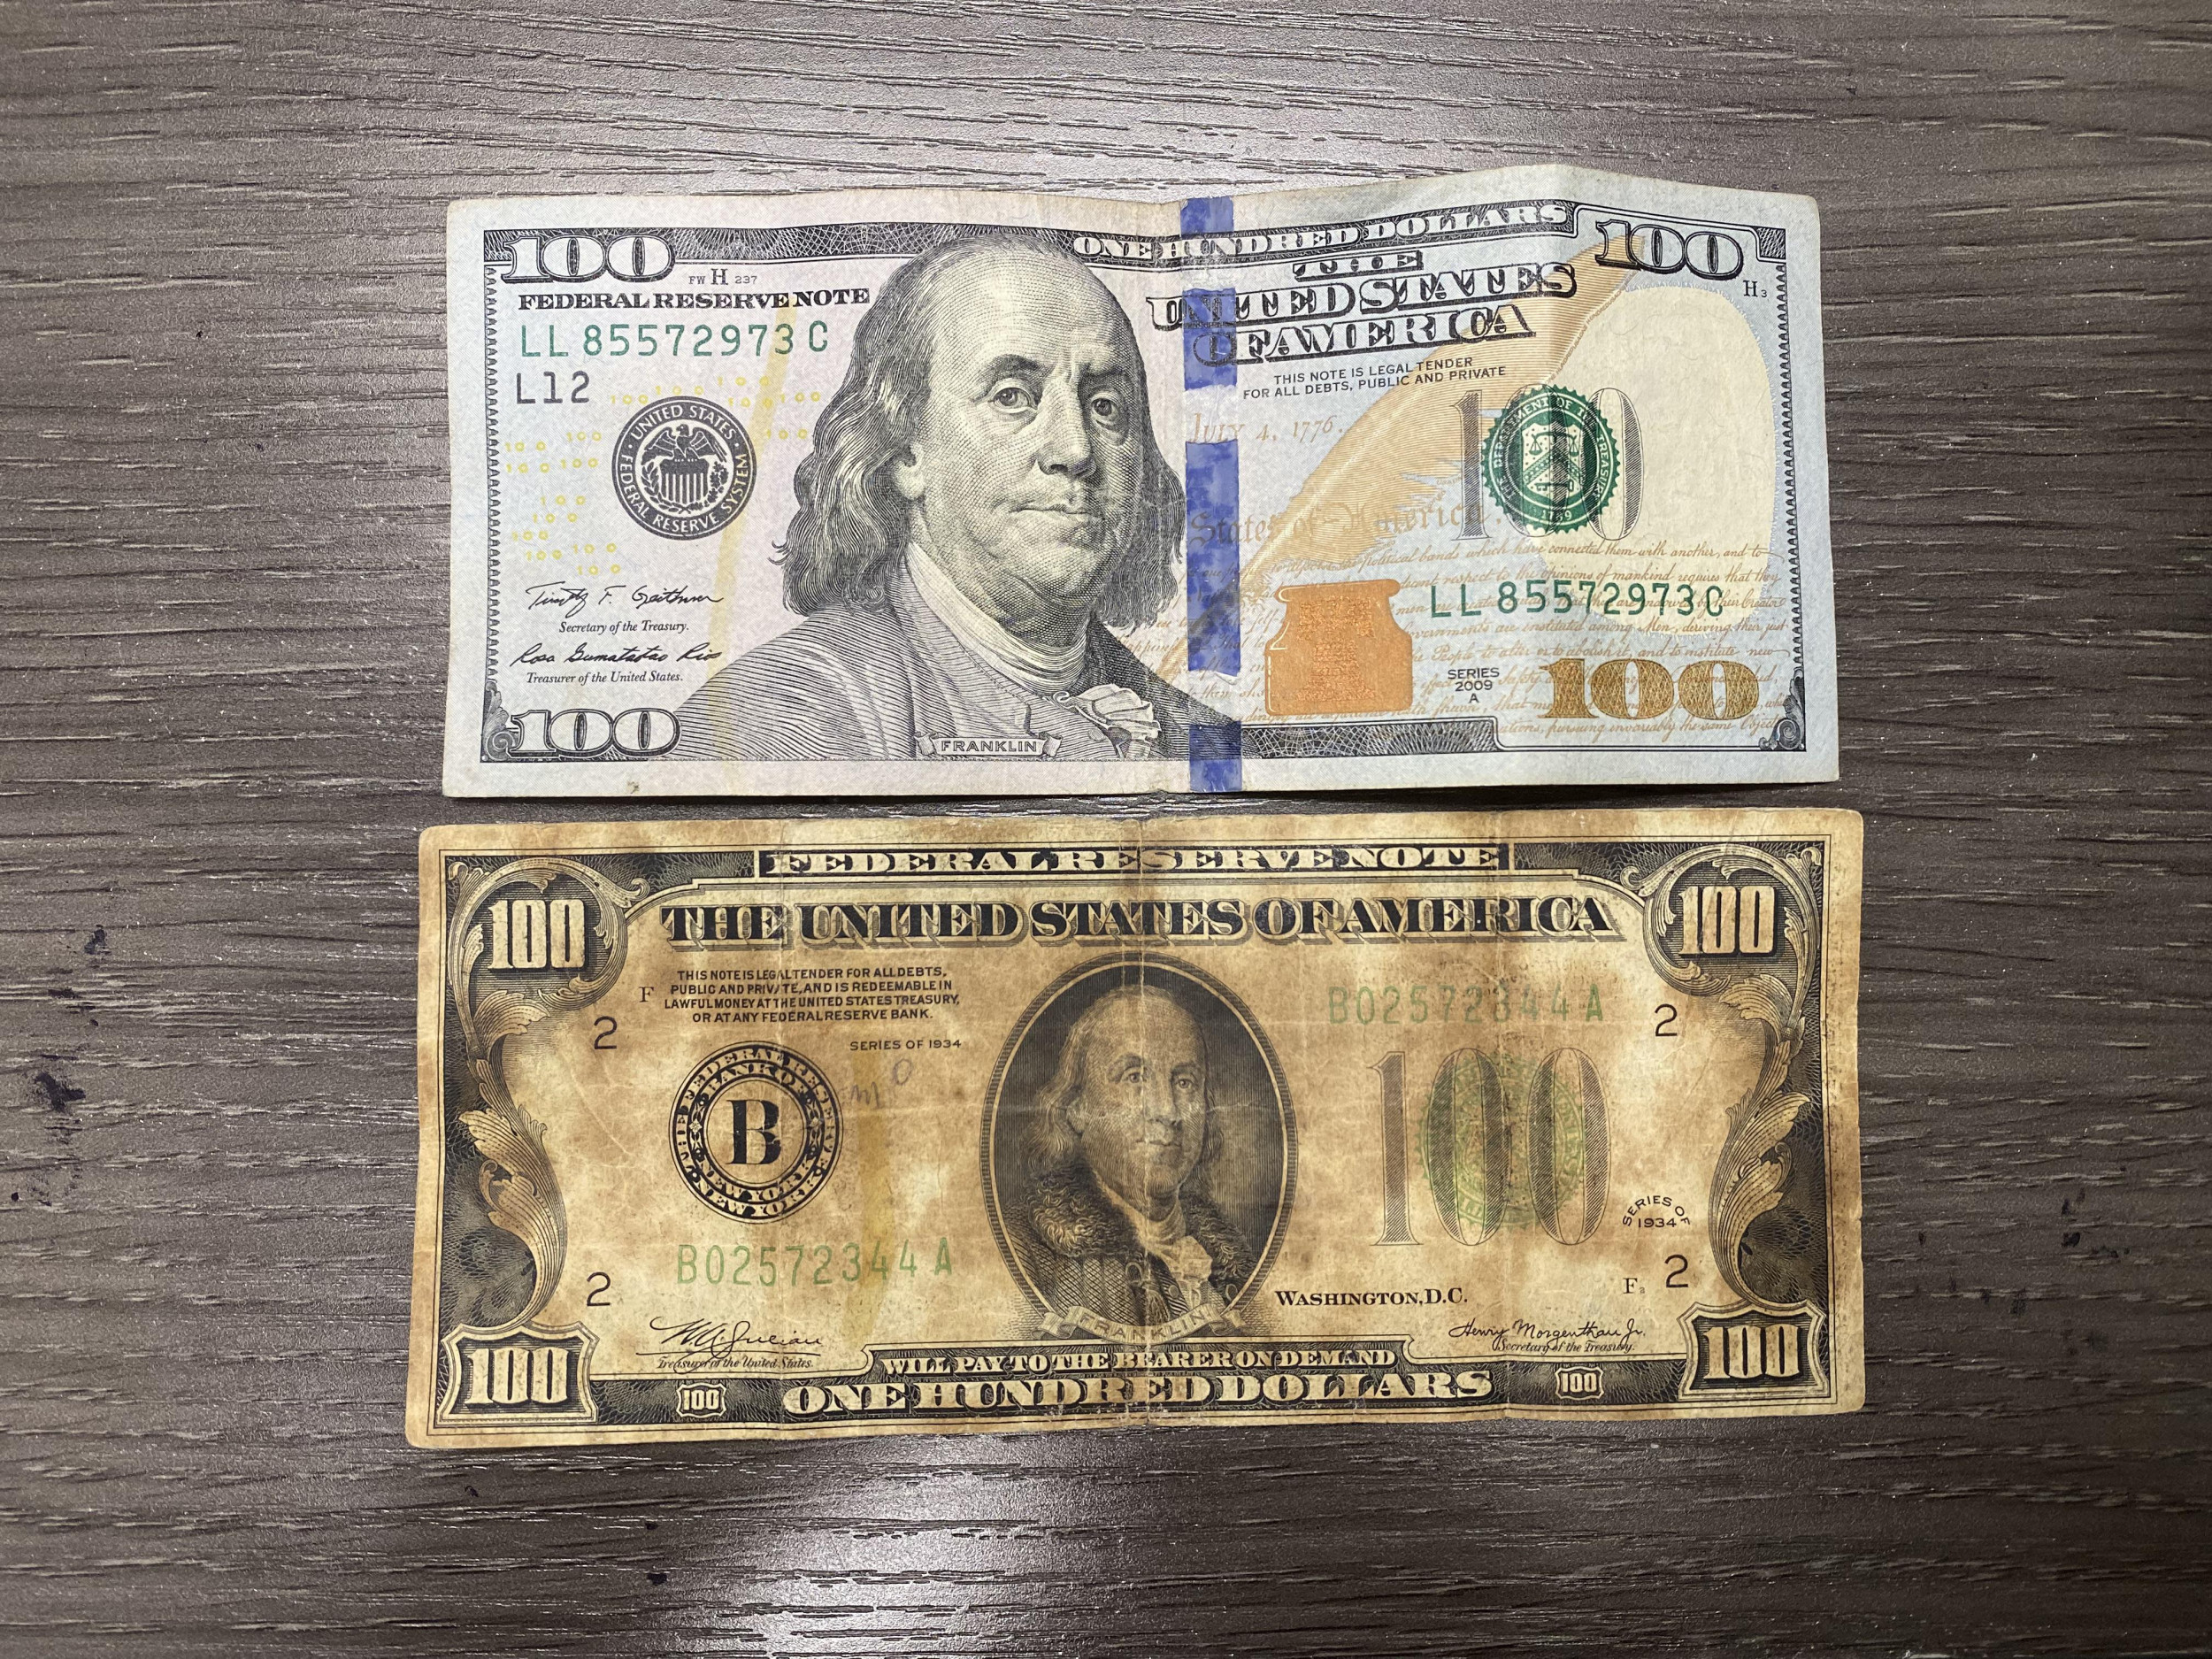 Dollar bill: Serial numbers make banknotes worth thousands in online trend